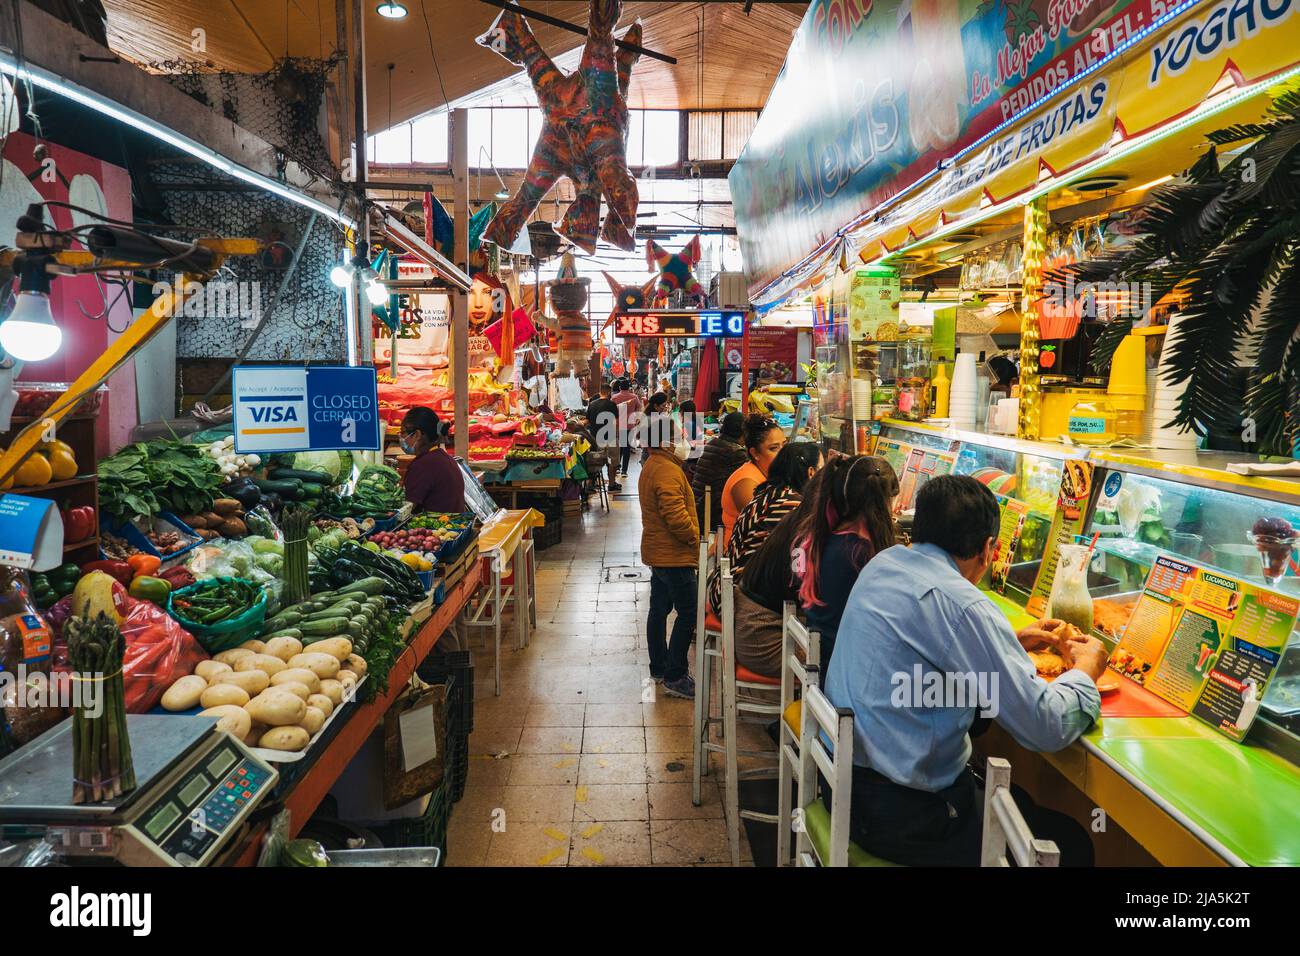 Patrons explore the various fresh produce and hot food vendors inside the Coyoacan Market in Mexico City, Mexico Stock Photo